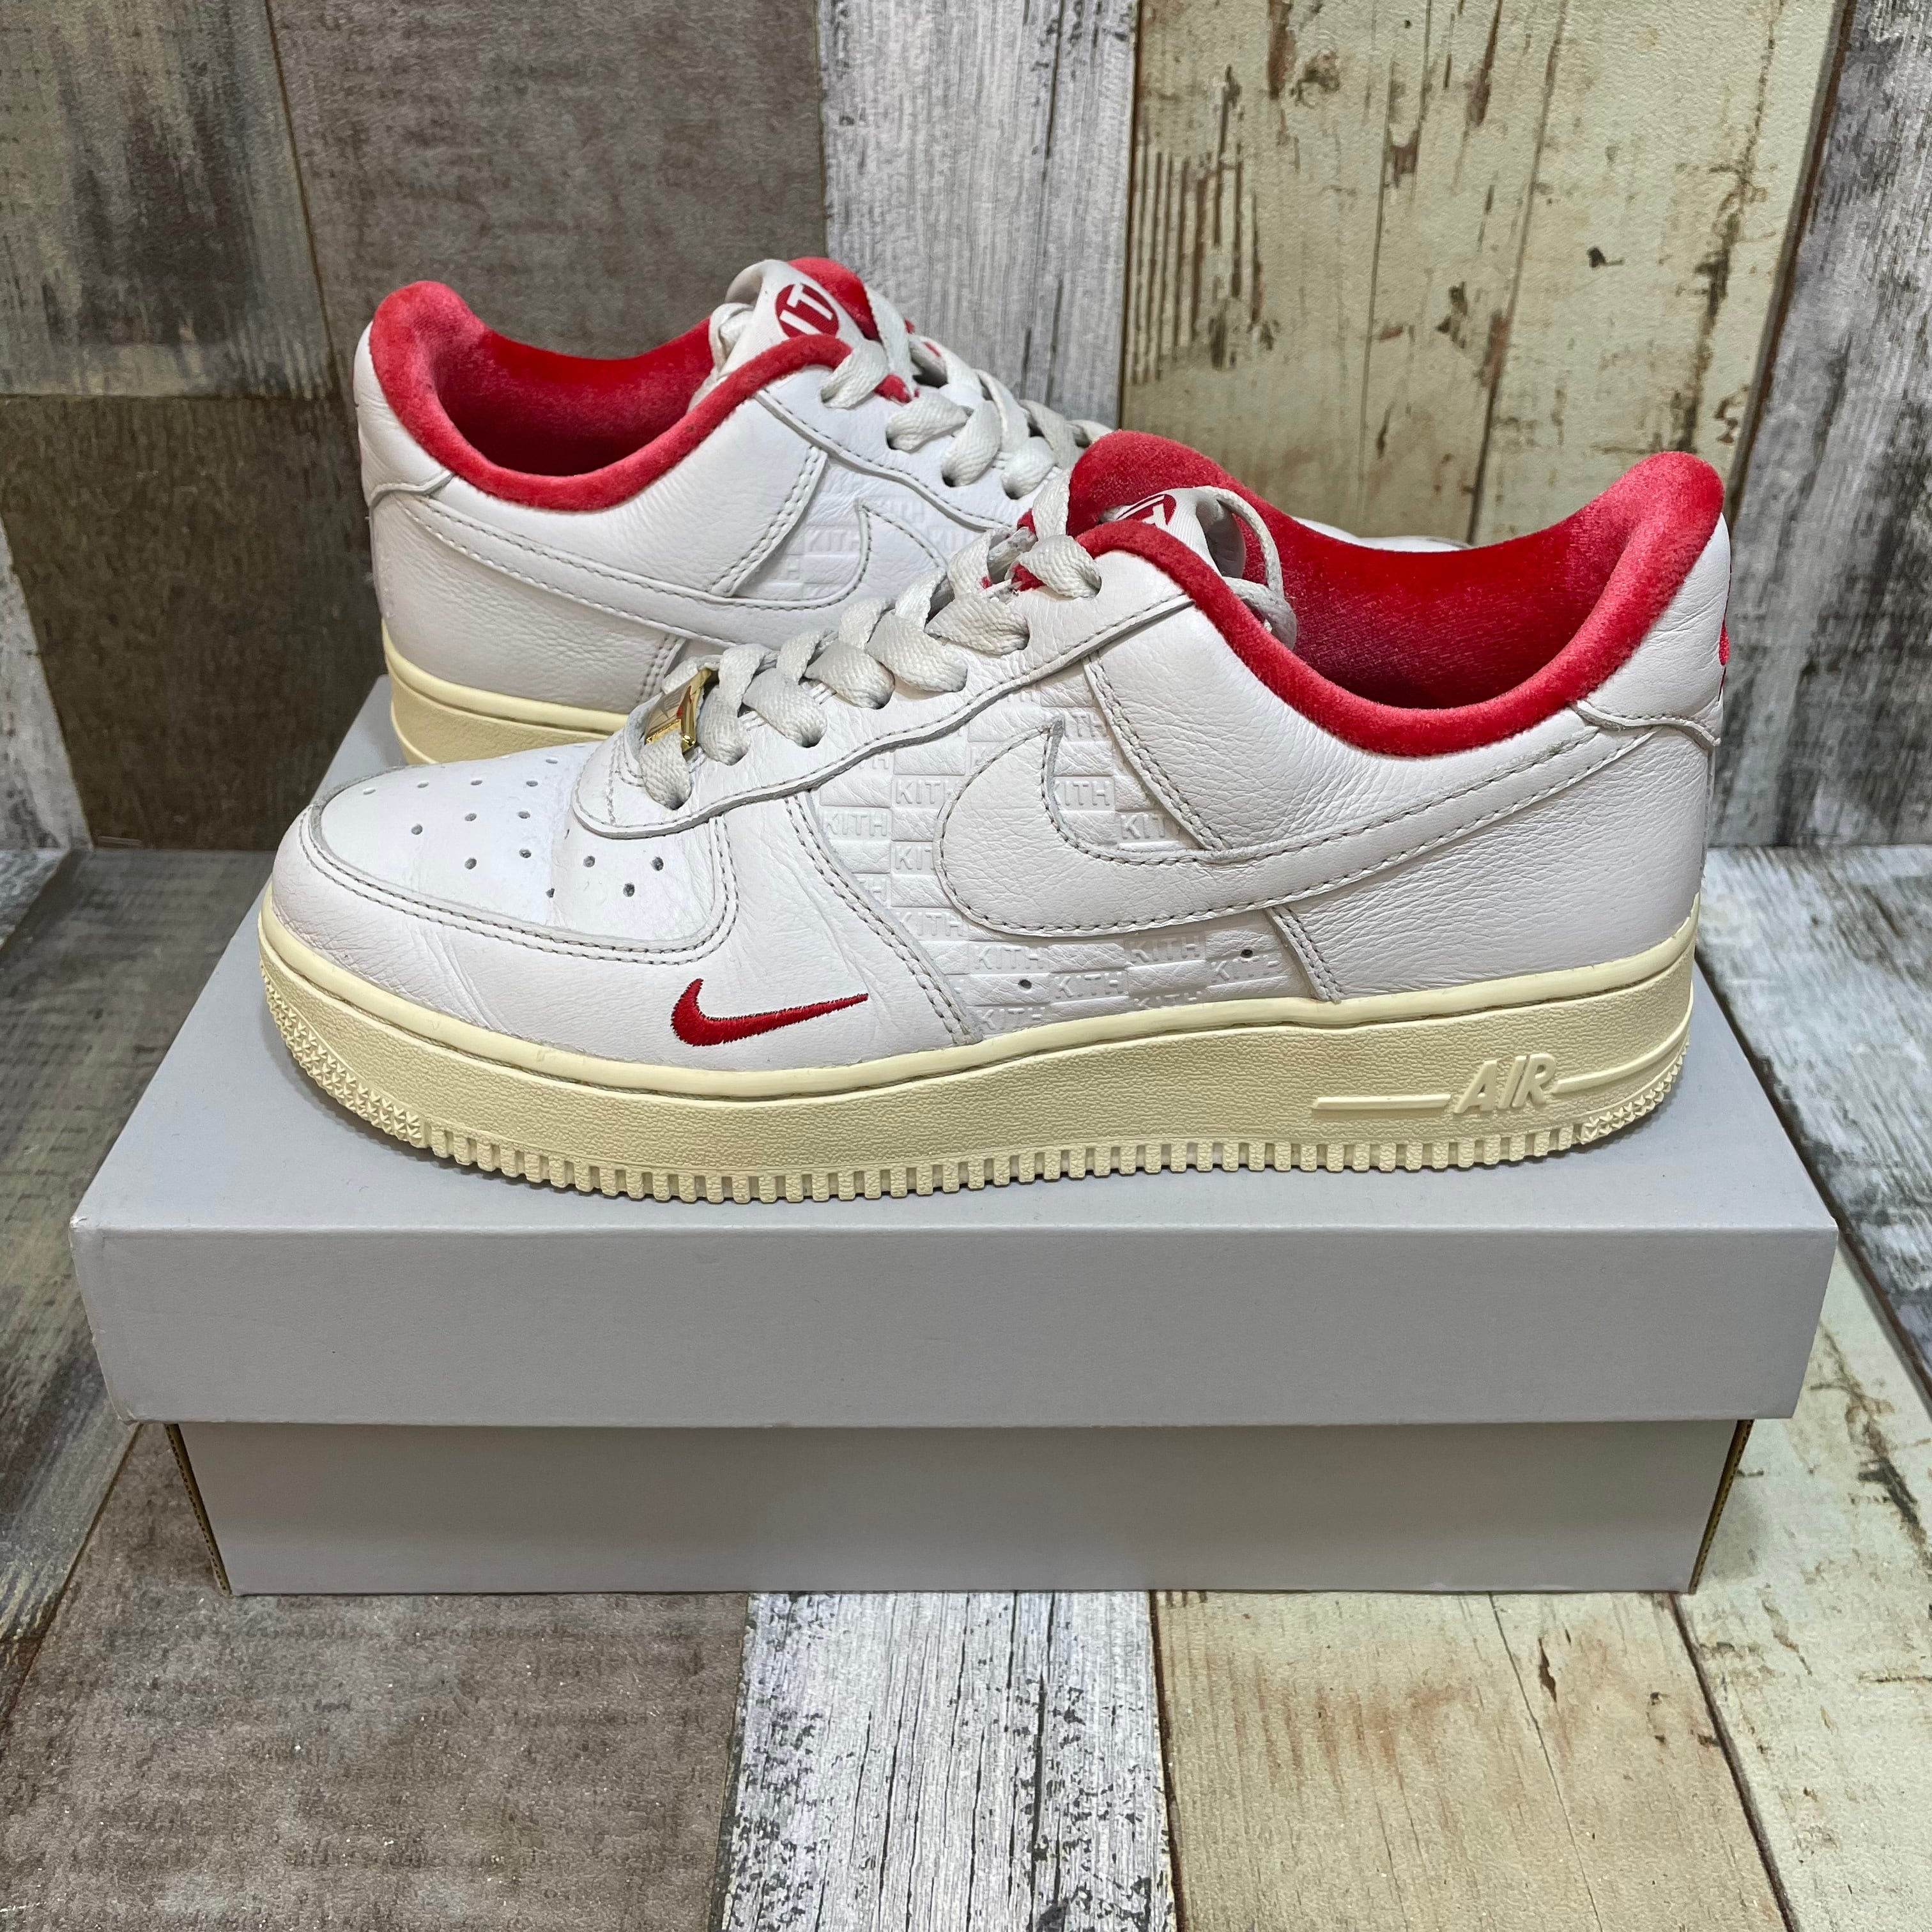 0373 NIKE AIR FORCE 1 LOW / KITH CZ7926-100